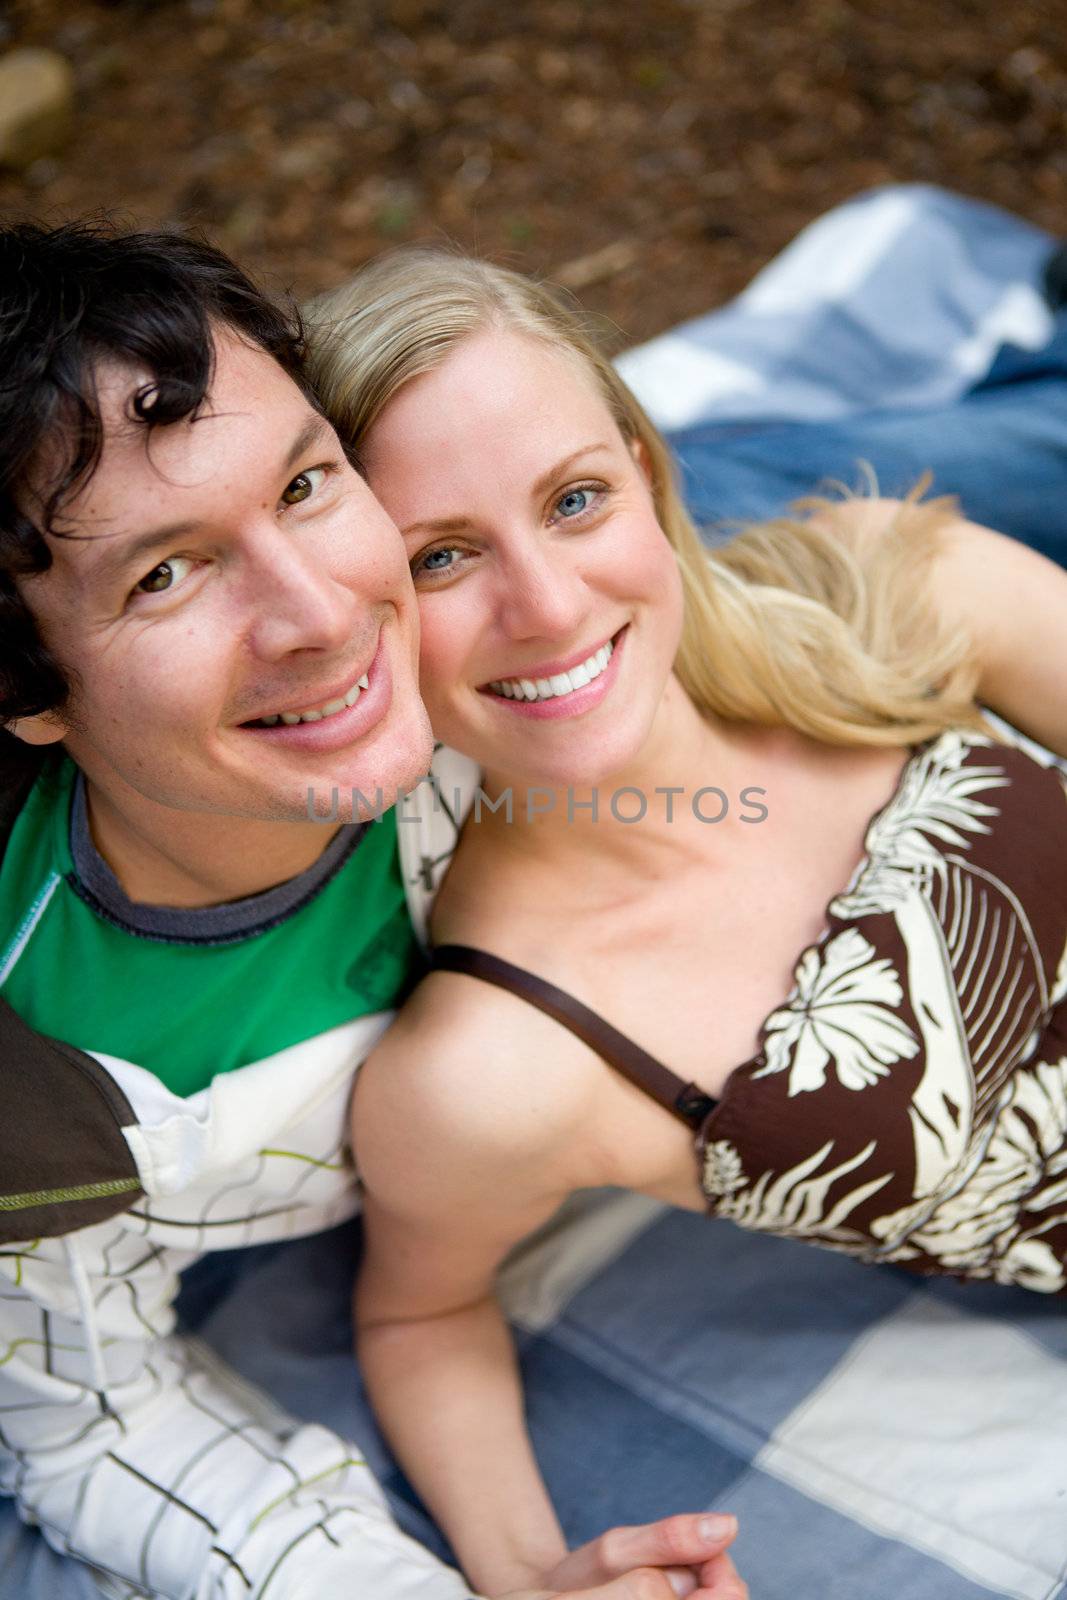 A portrait of a smiling happy couple outdoors on a picnic blanket